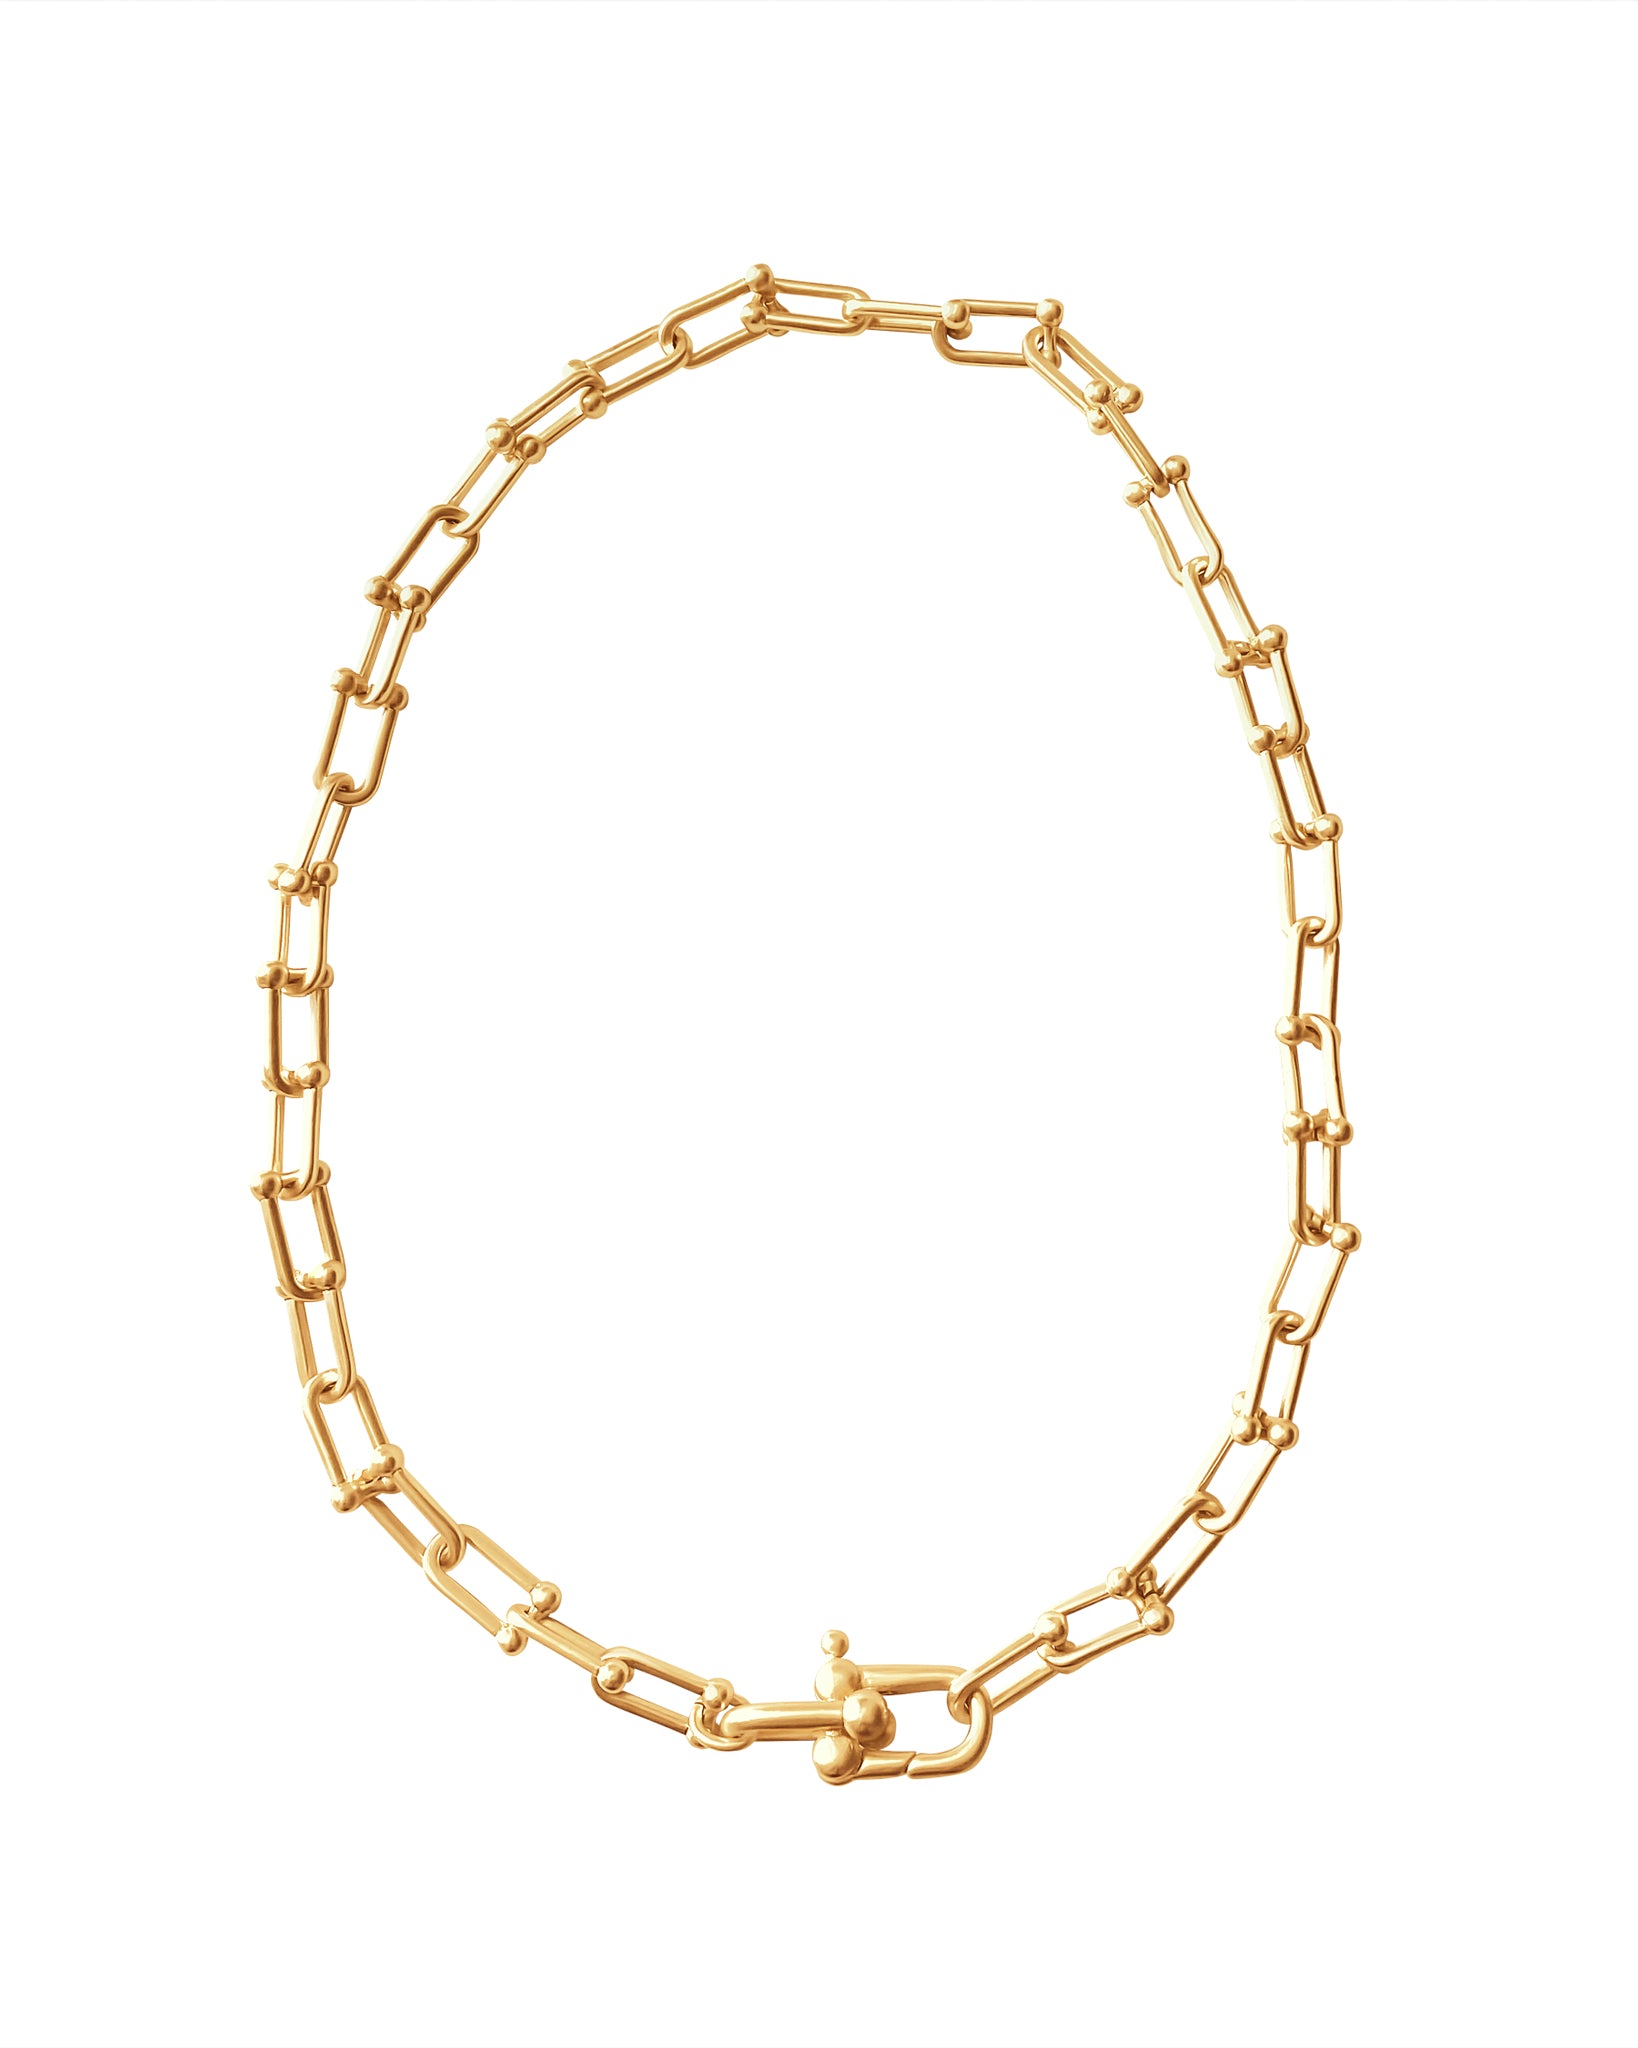 Tiffany & Co. Tiffany HardWear graduated link necklace in 18k gold - Size  18 in Necklaces | Heathrow Reserve & Collect